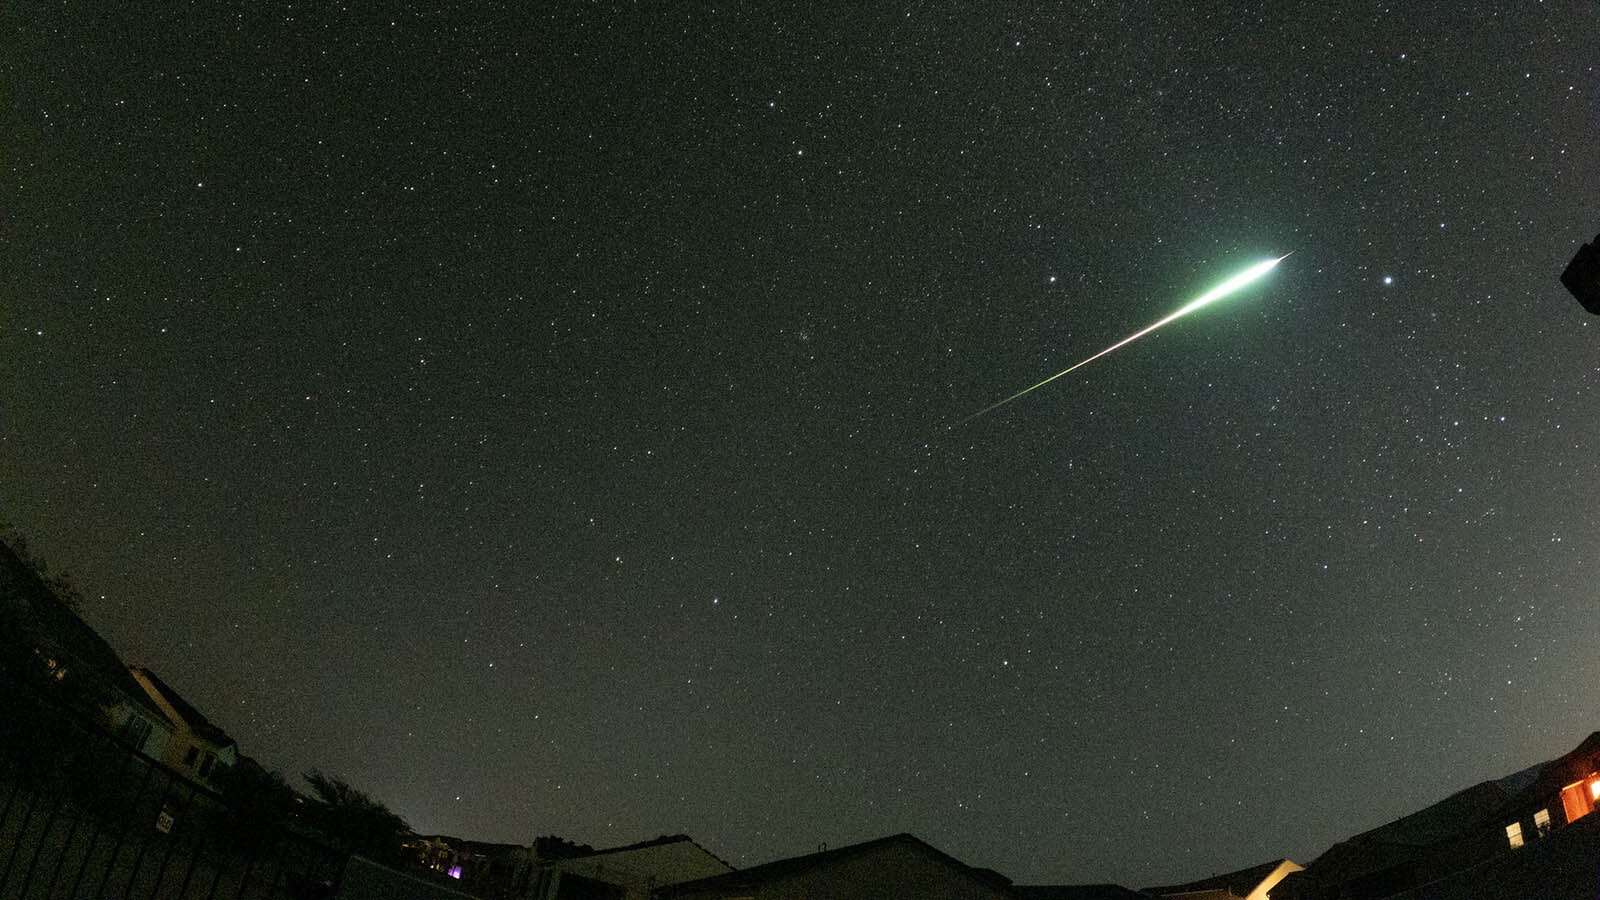 This bright fireball was captured while Jan Curtis slept with a GoPro 10. It's a 30-second exposure.